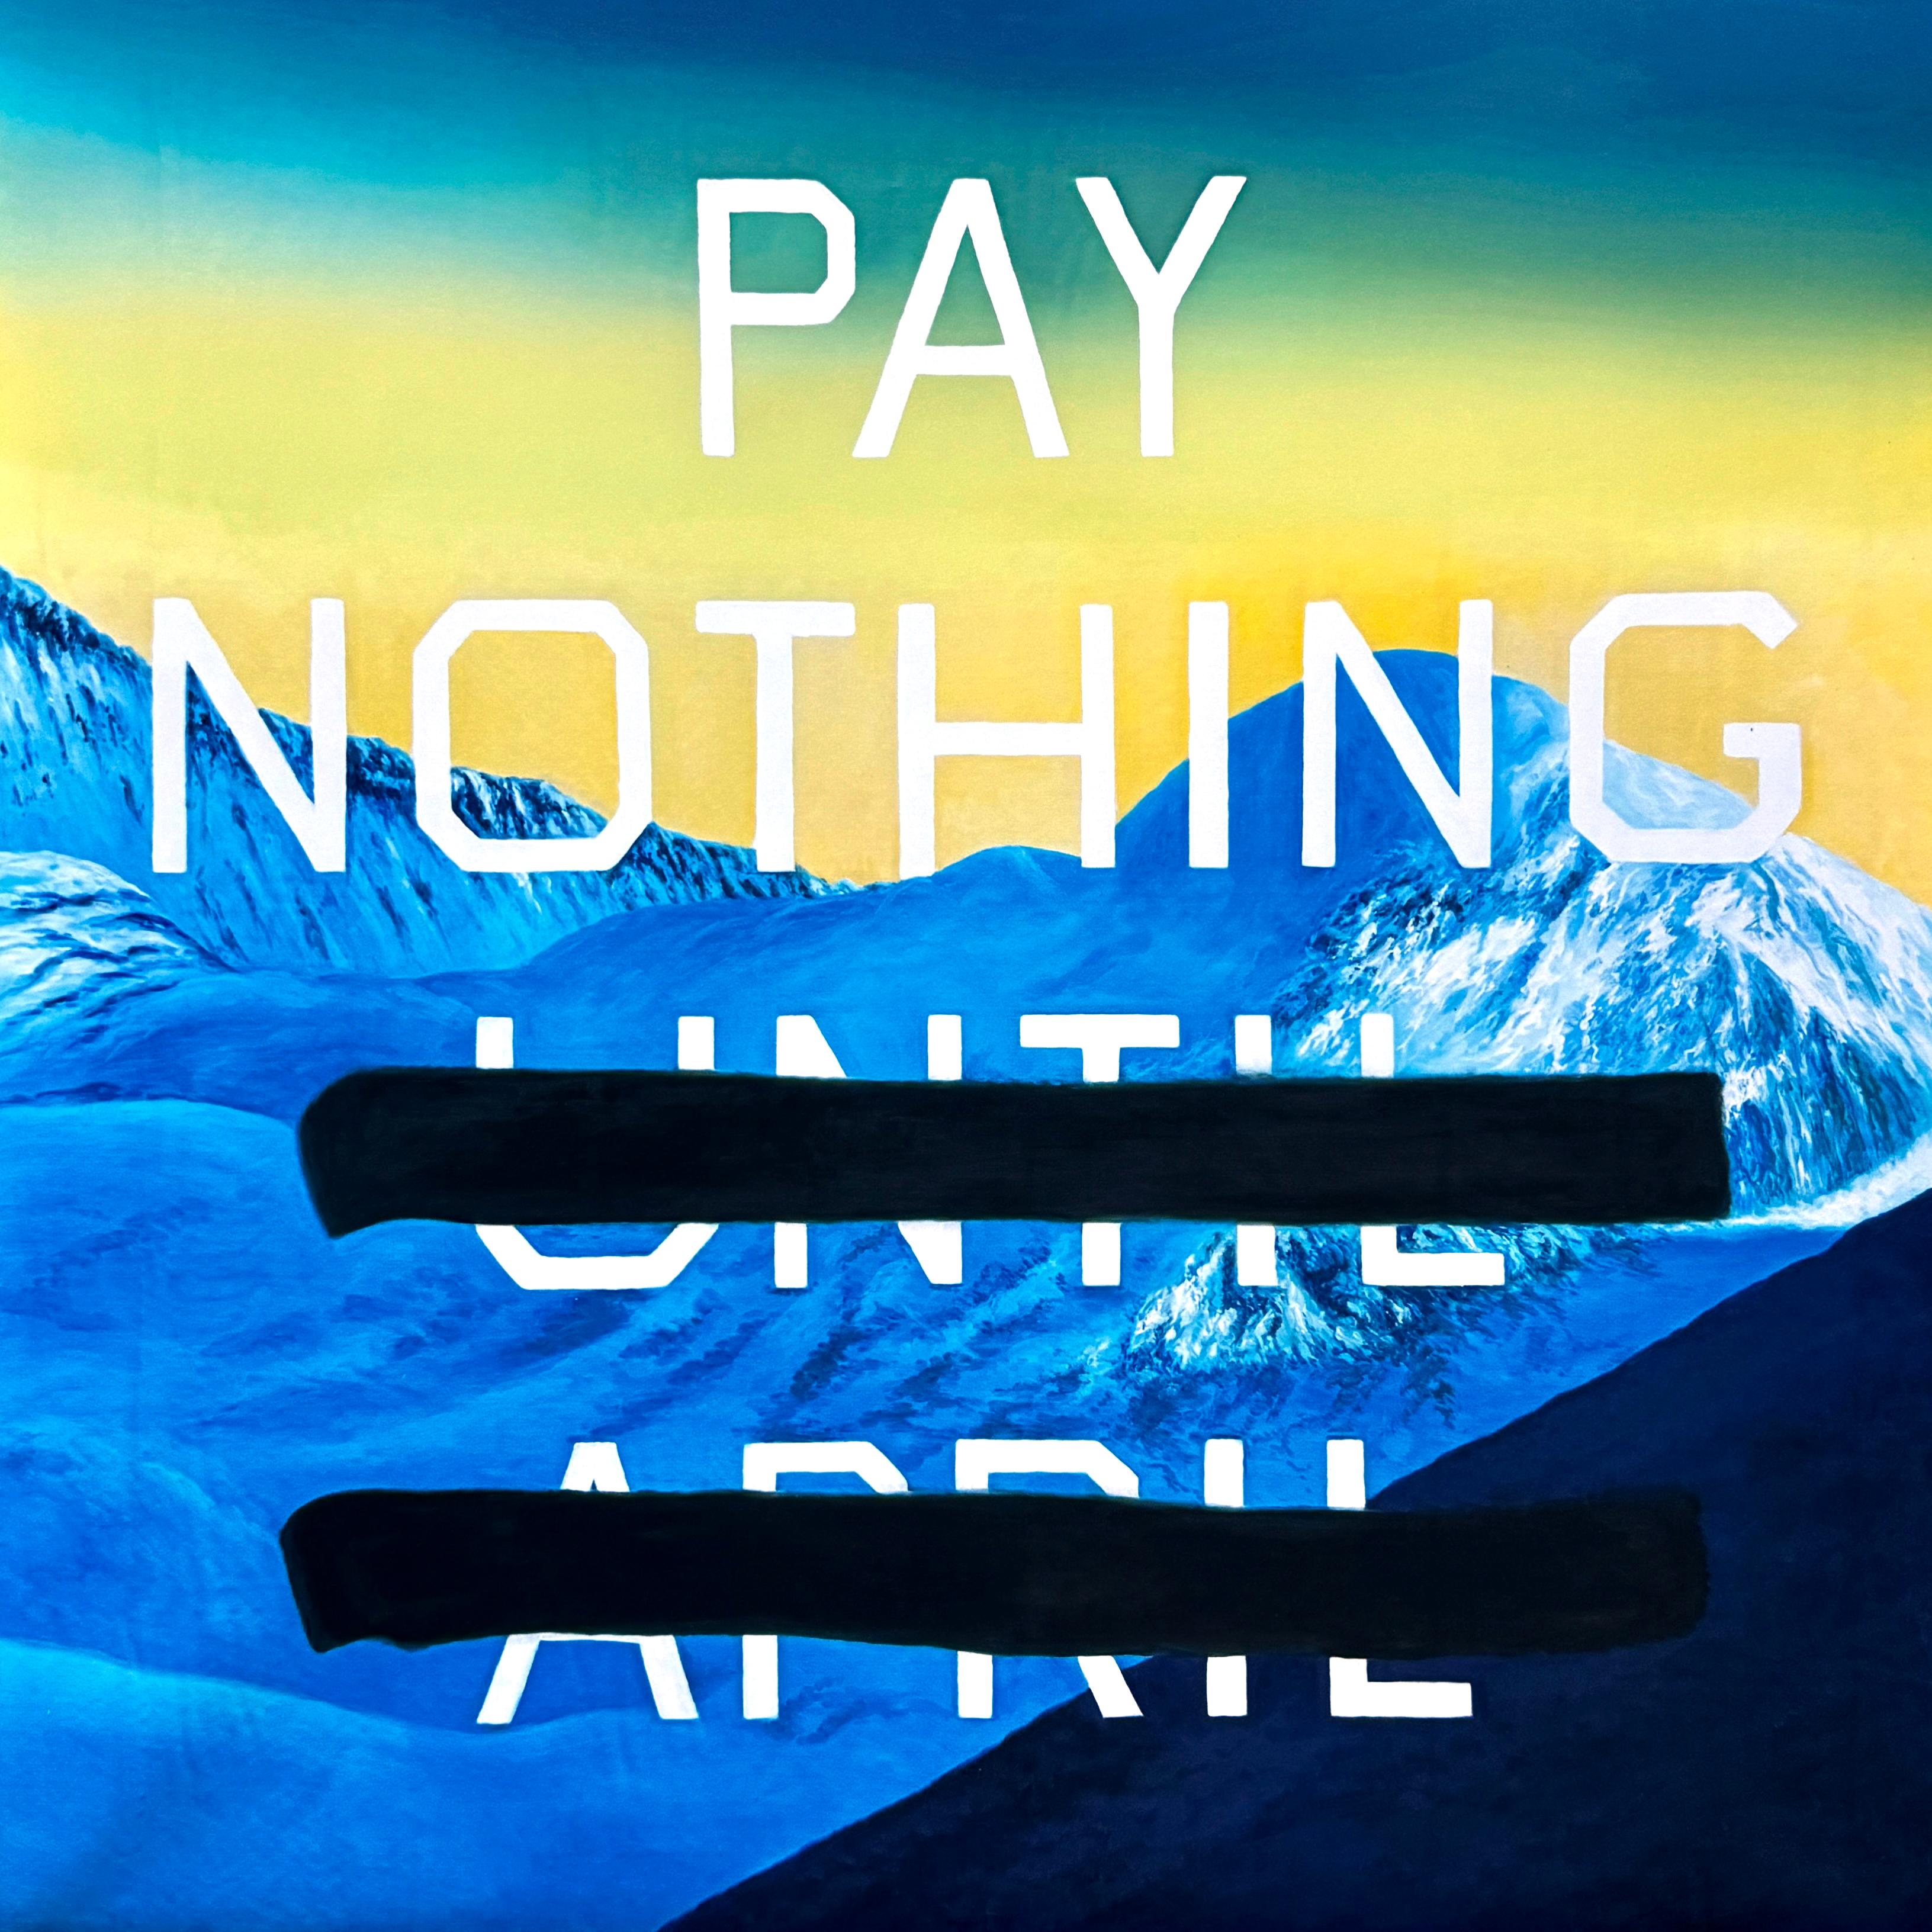 Kenny Schachter Print - Pay Nothing